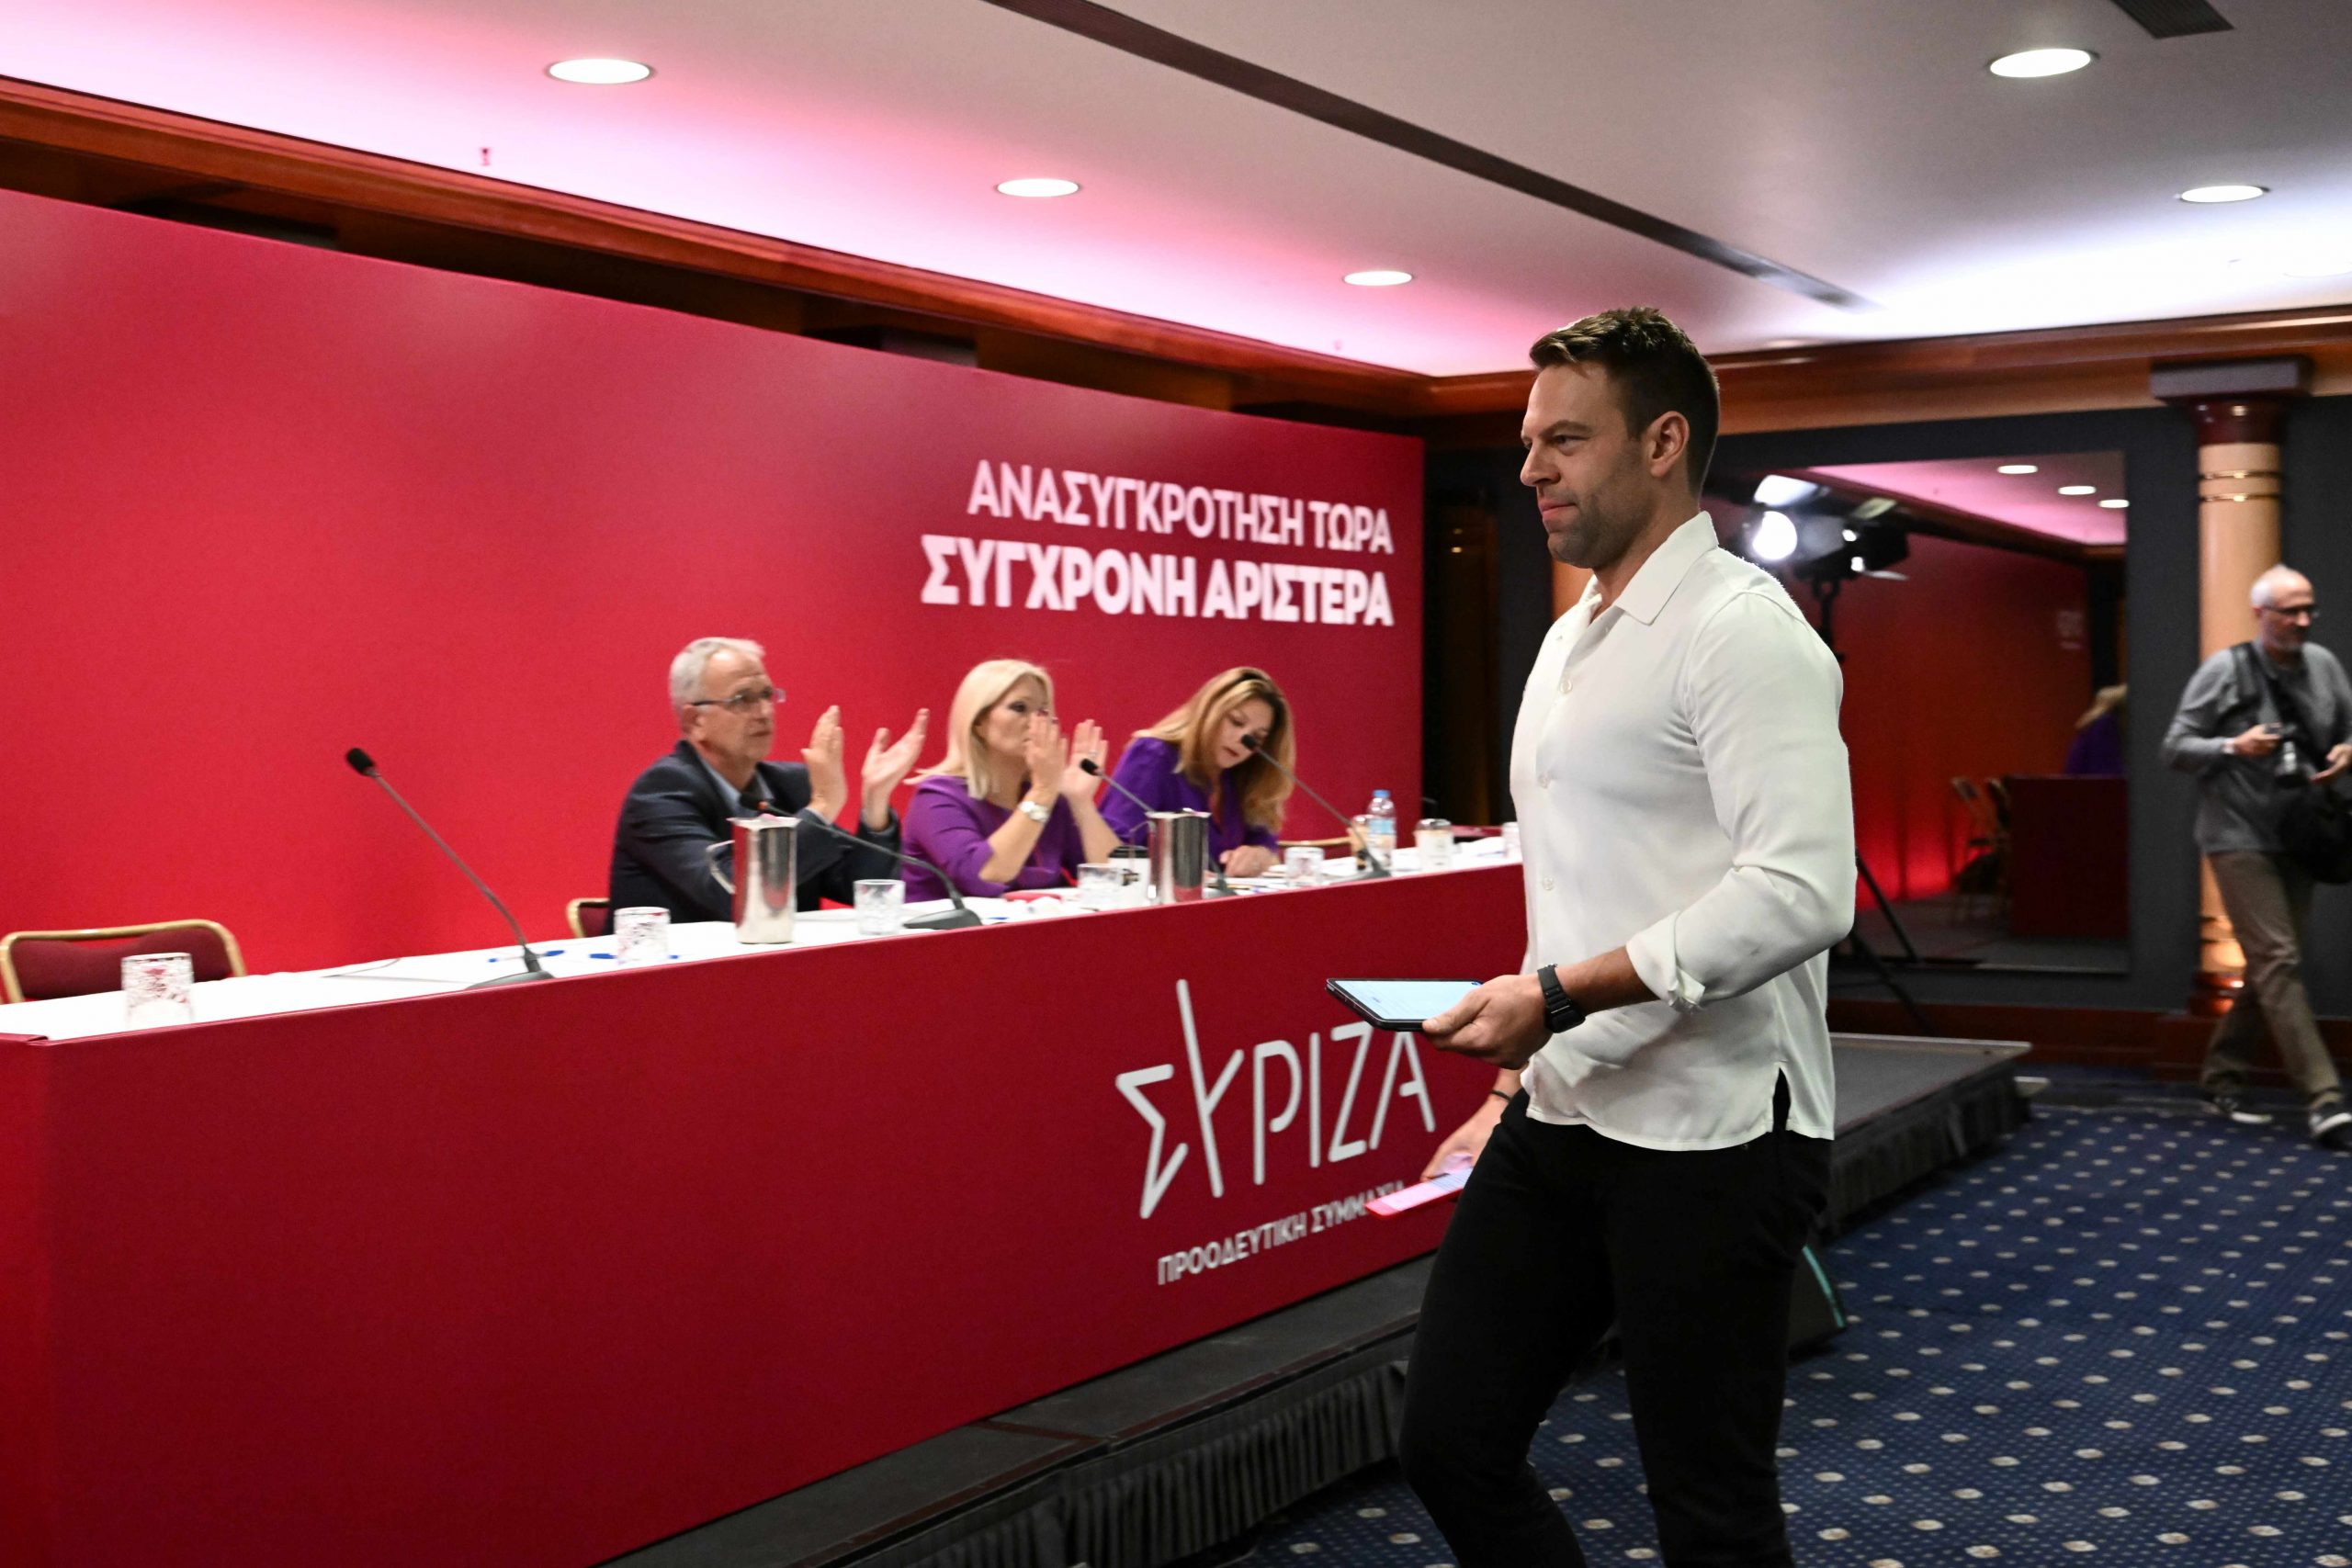 From Olympus to Tartarus: Syriza Slides from Power to Possible Split